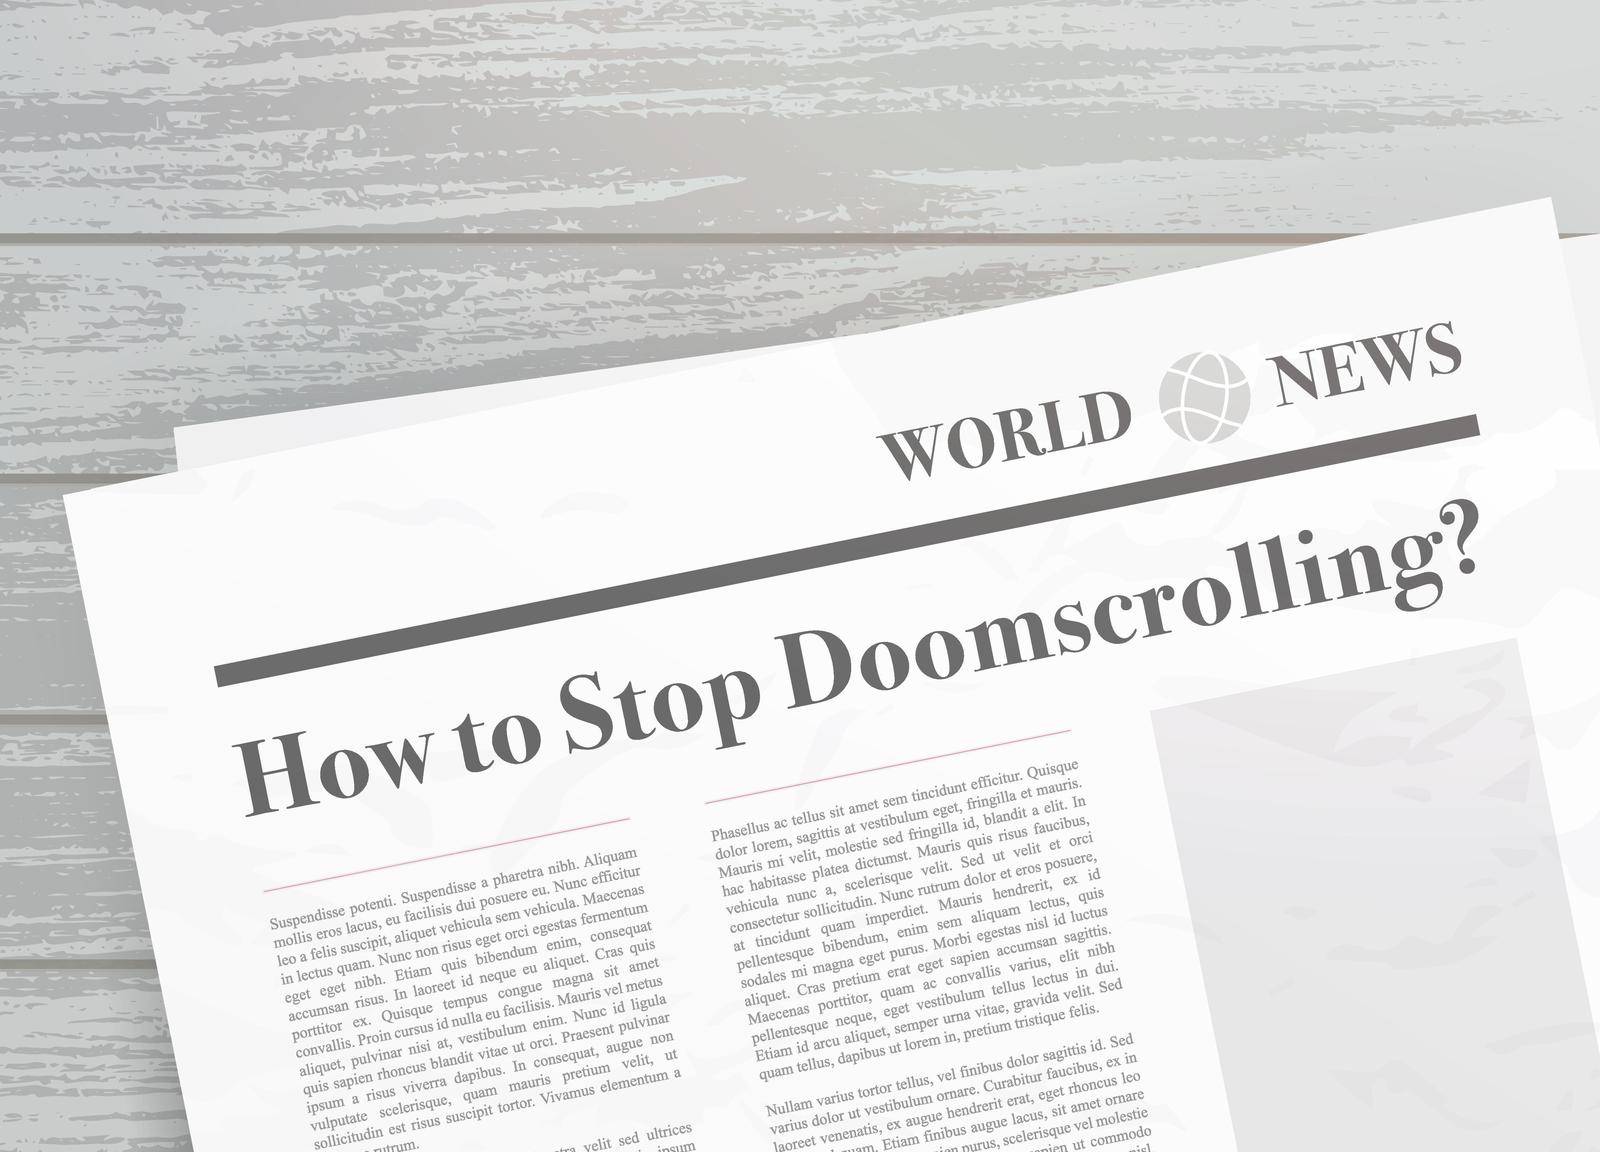 How to stop Doomscrolling. Newspaper headline concept. Doomsurfing - act of spending an excessive amount of screen time devoted to the absorption of negative news by bestforbest